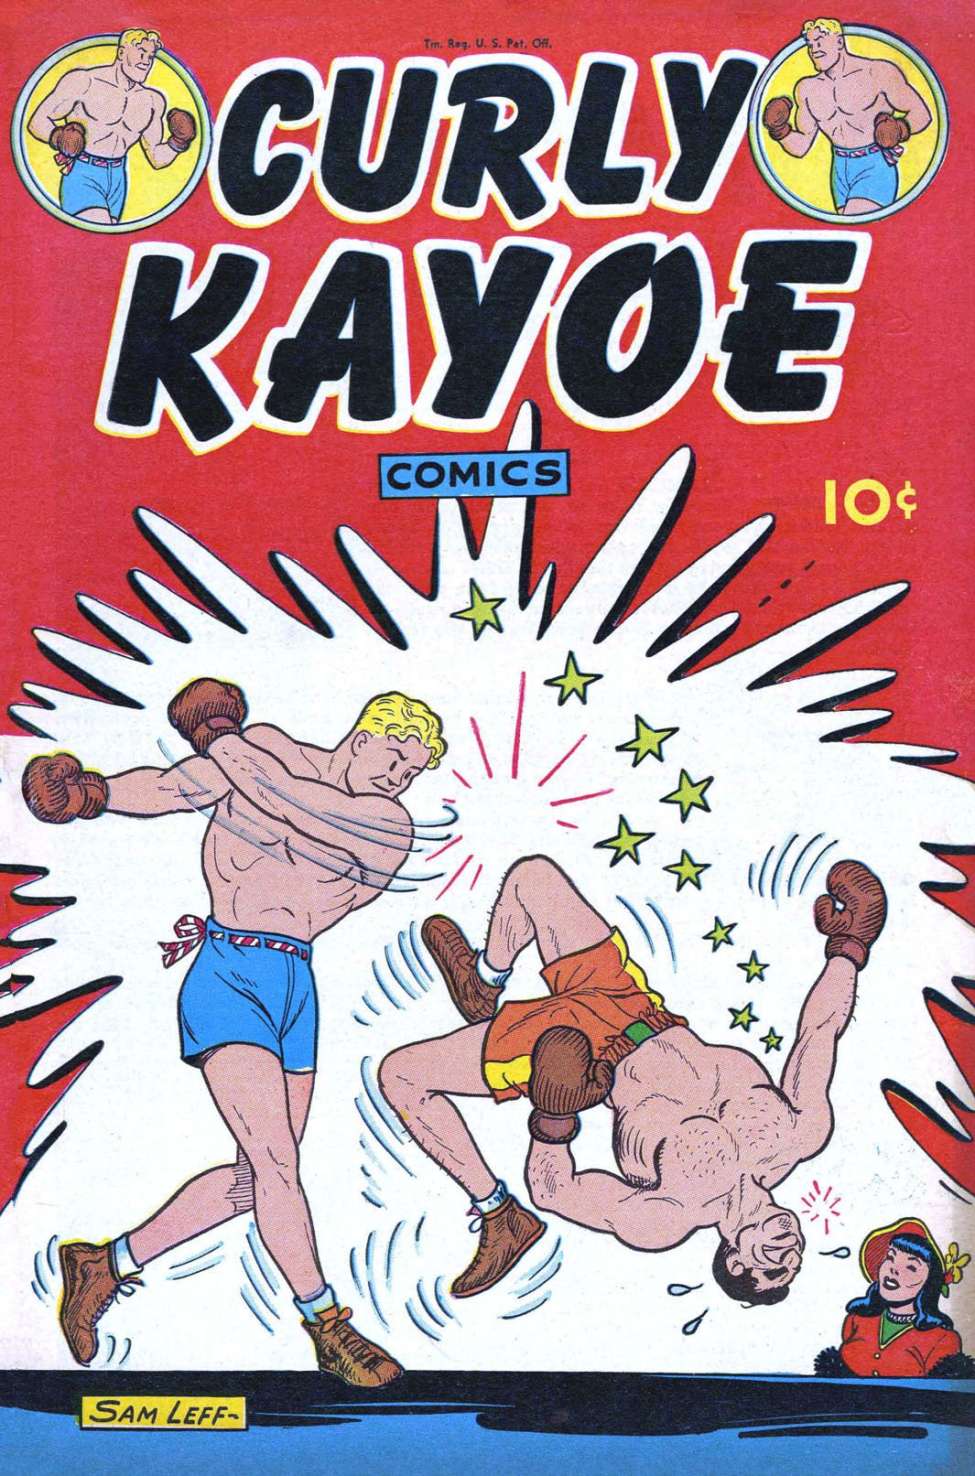 Book Cover For Curly Kayoe 1